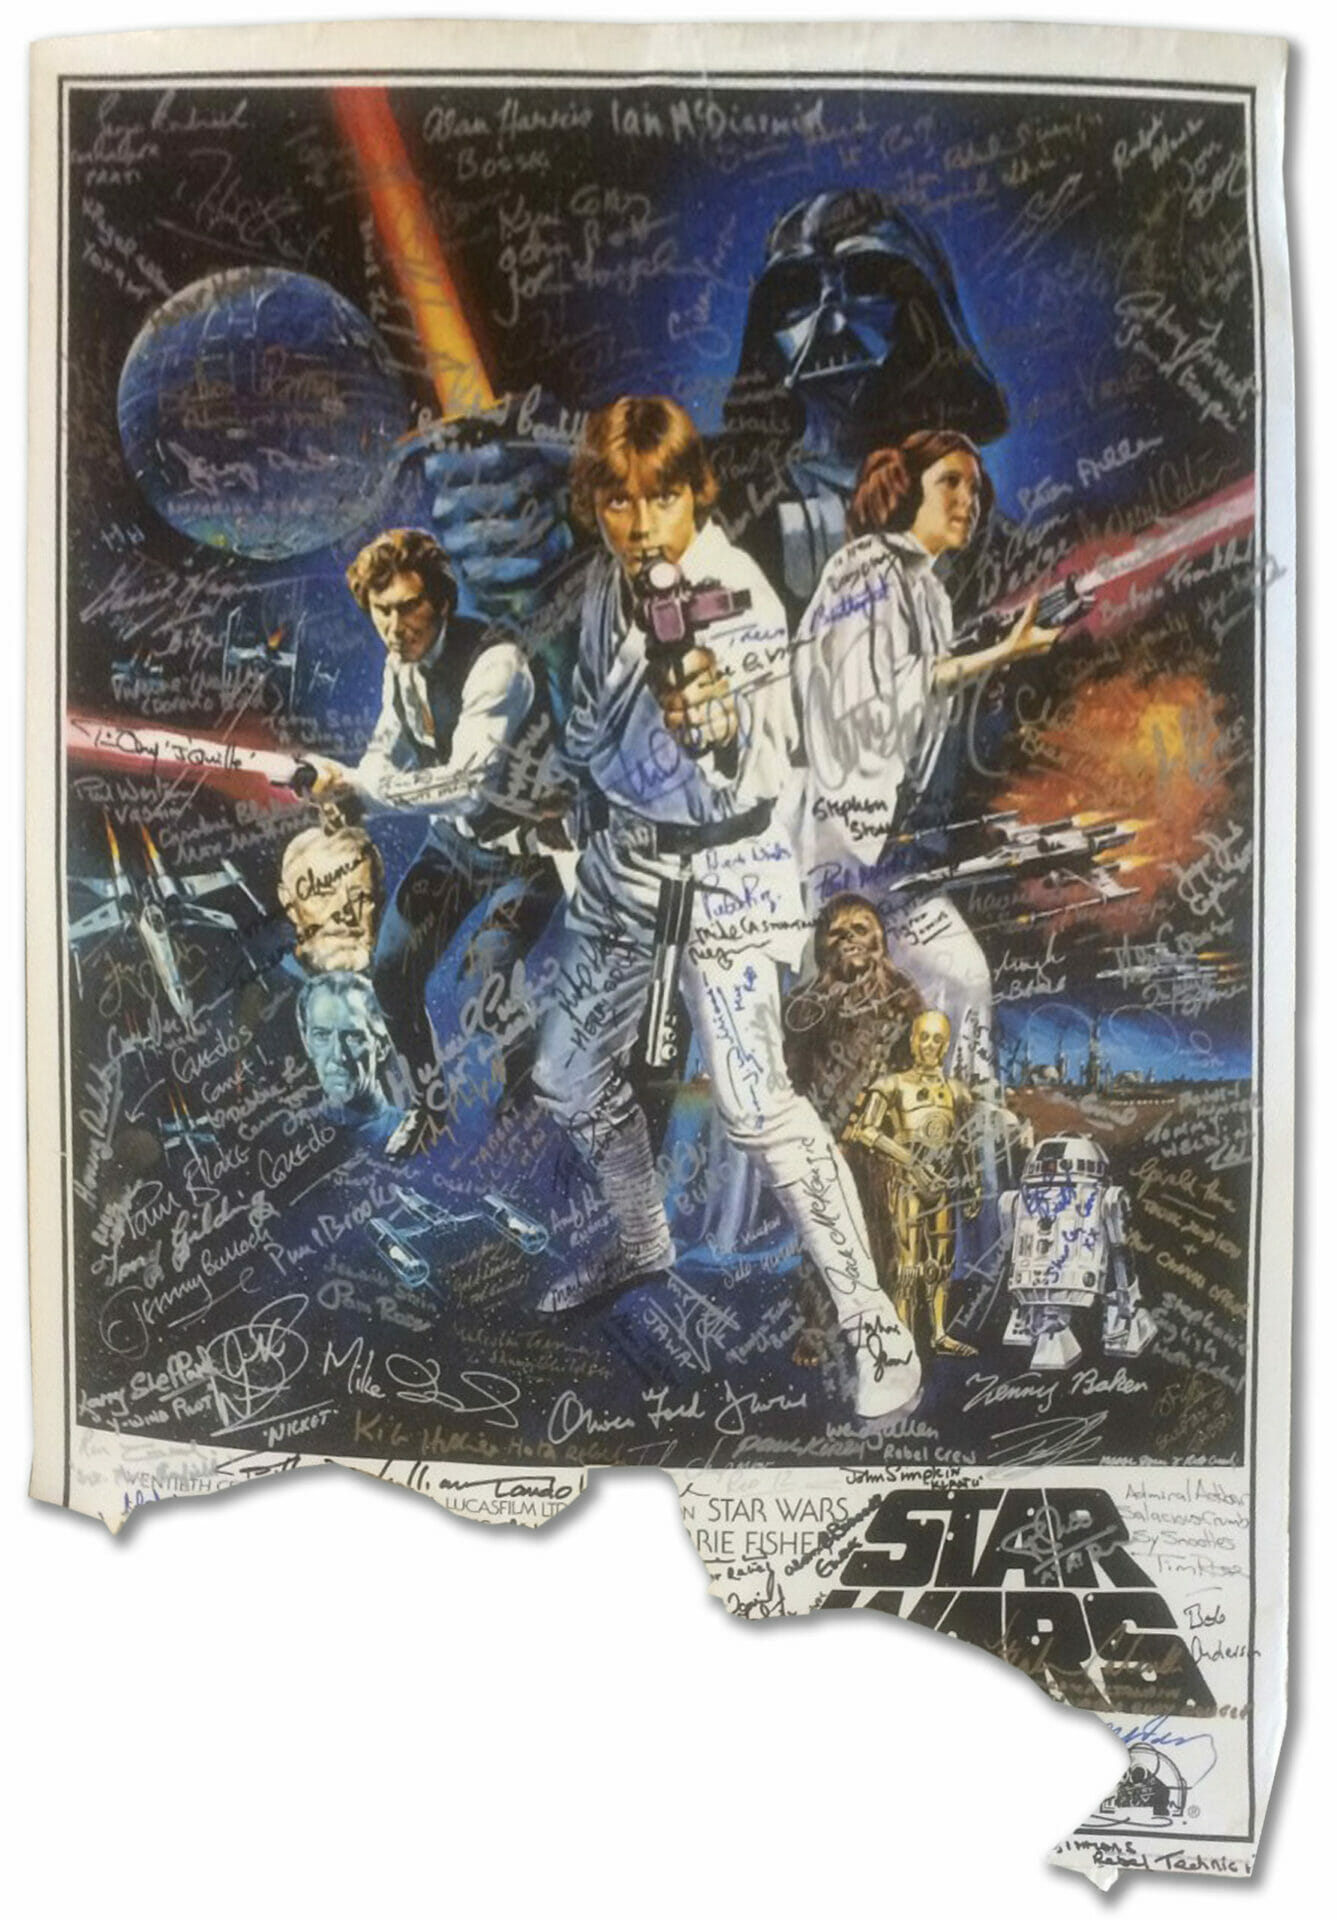 Star Wars poster before